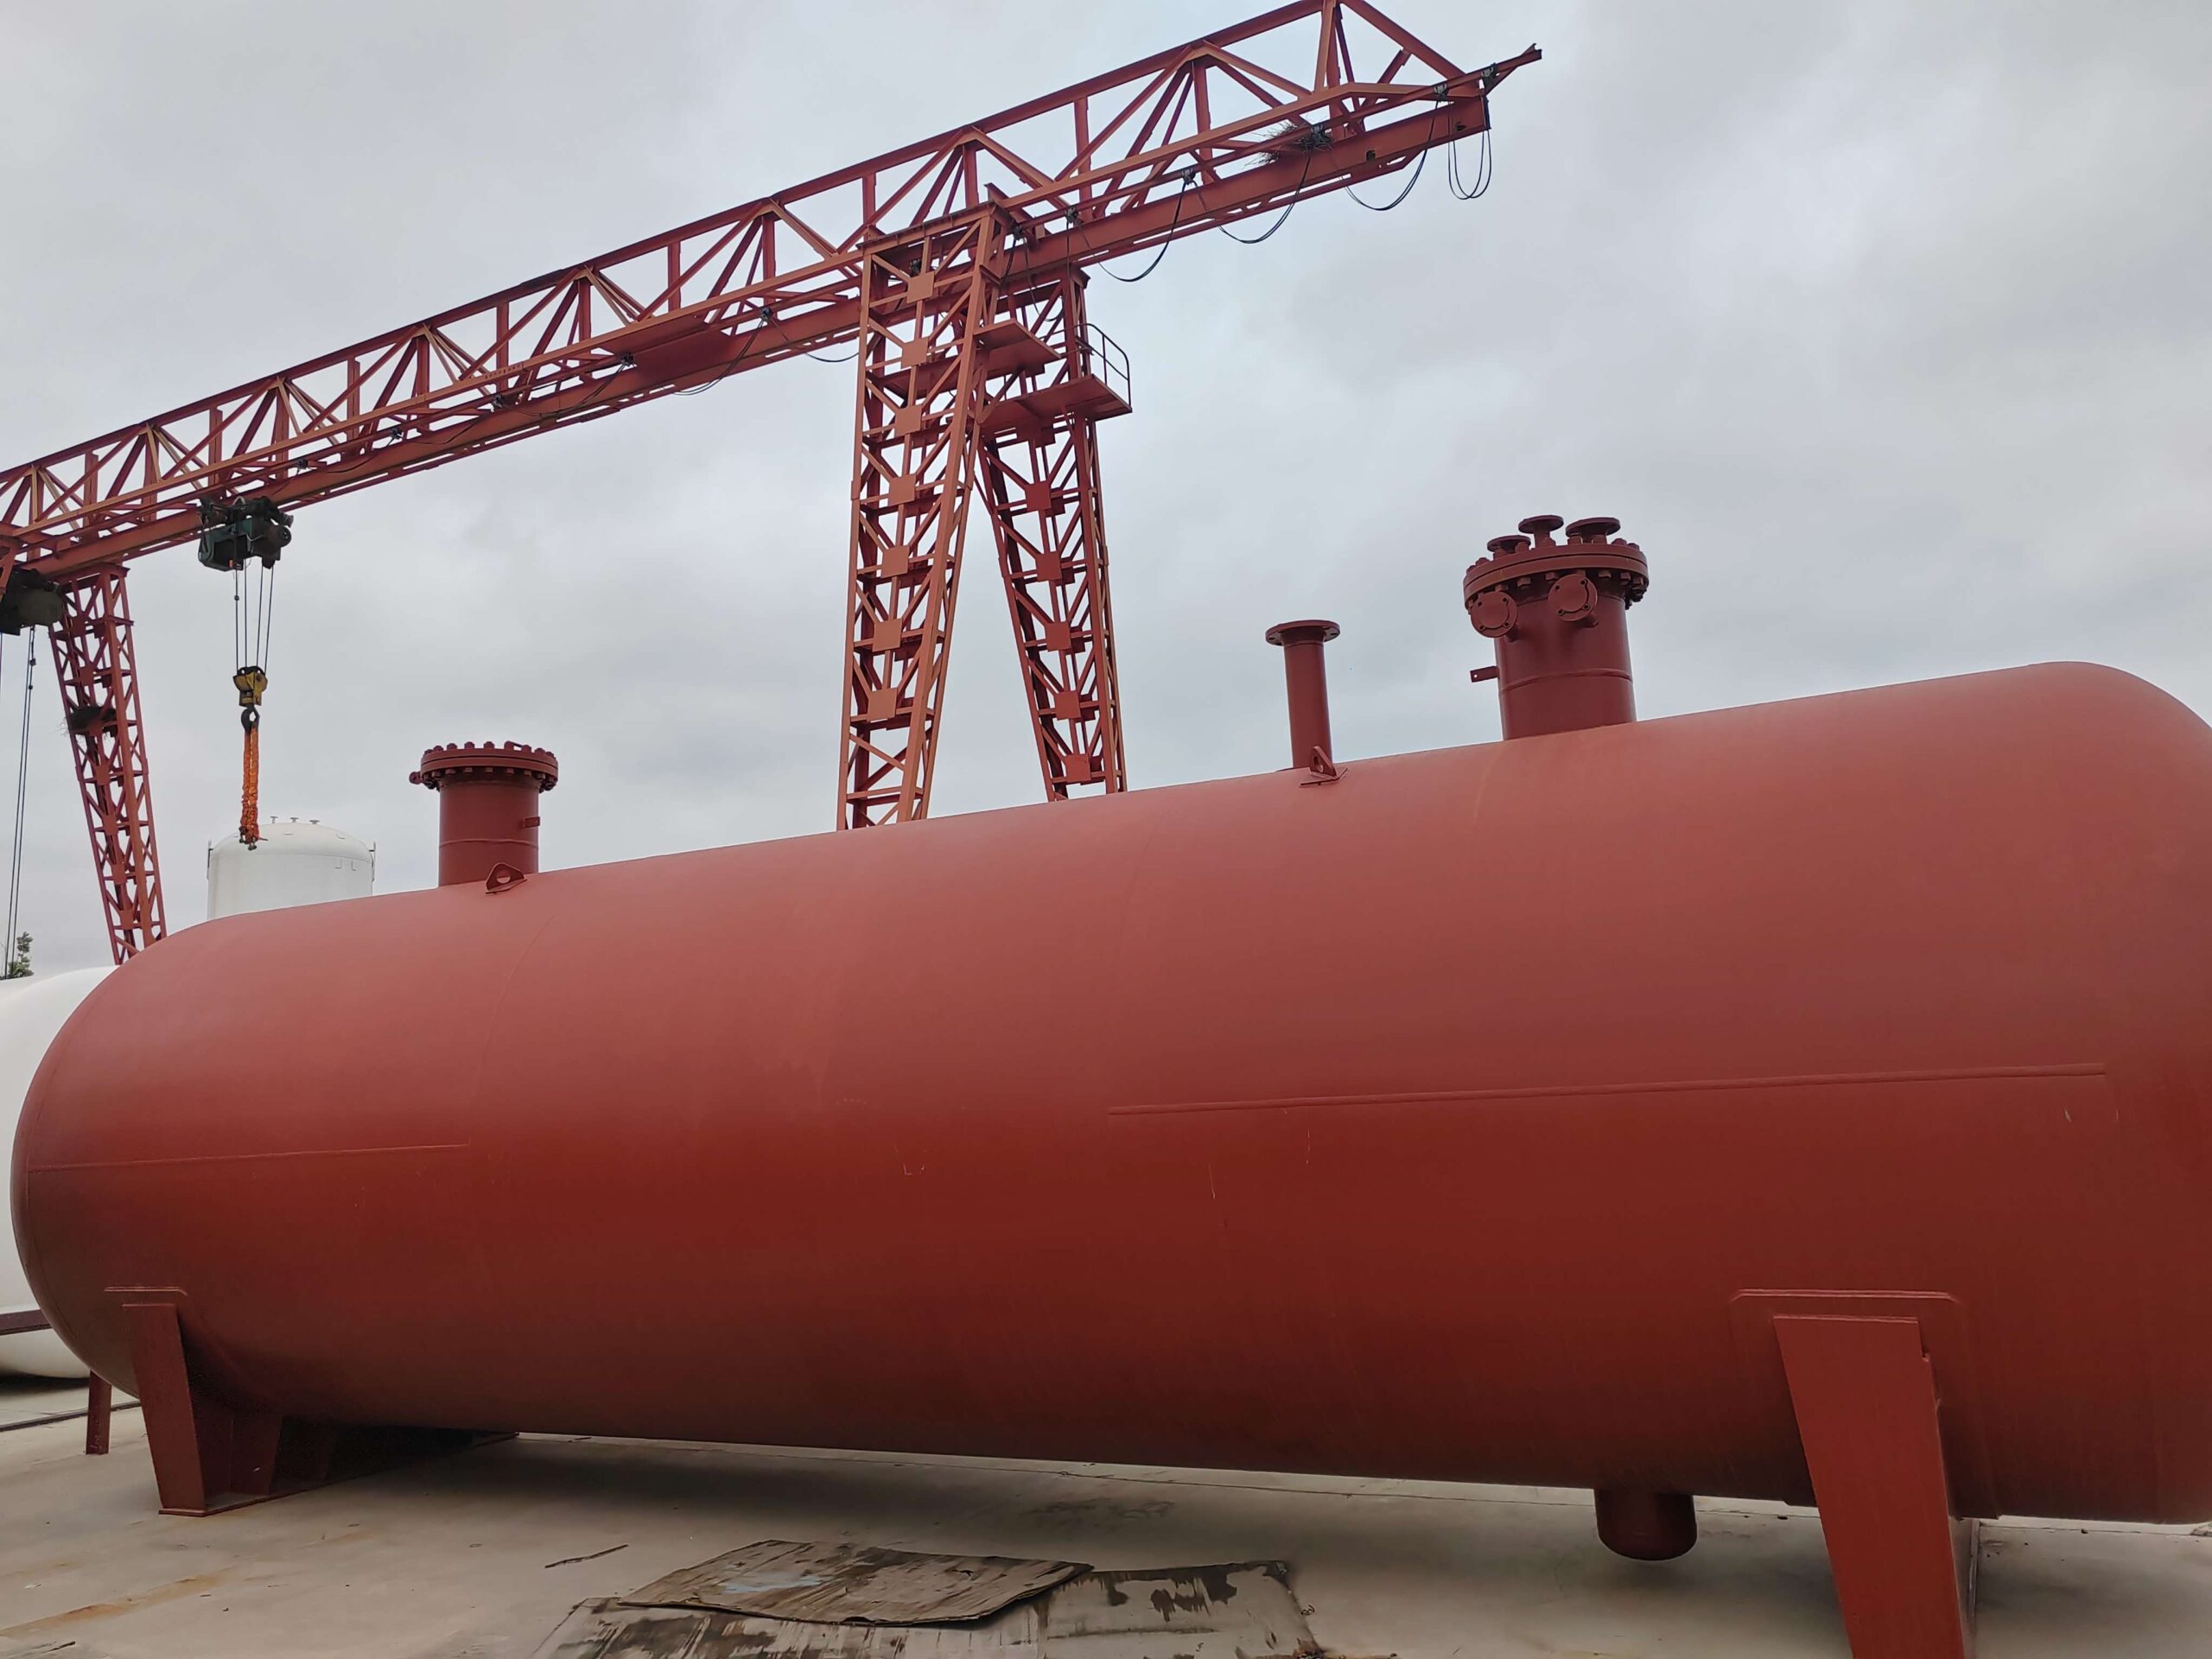 Strict quality appraisal of liquefied gas storage tanks